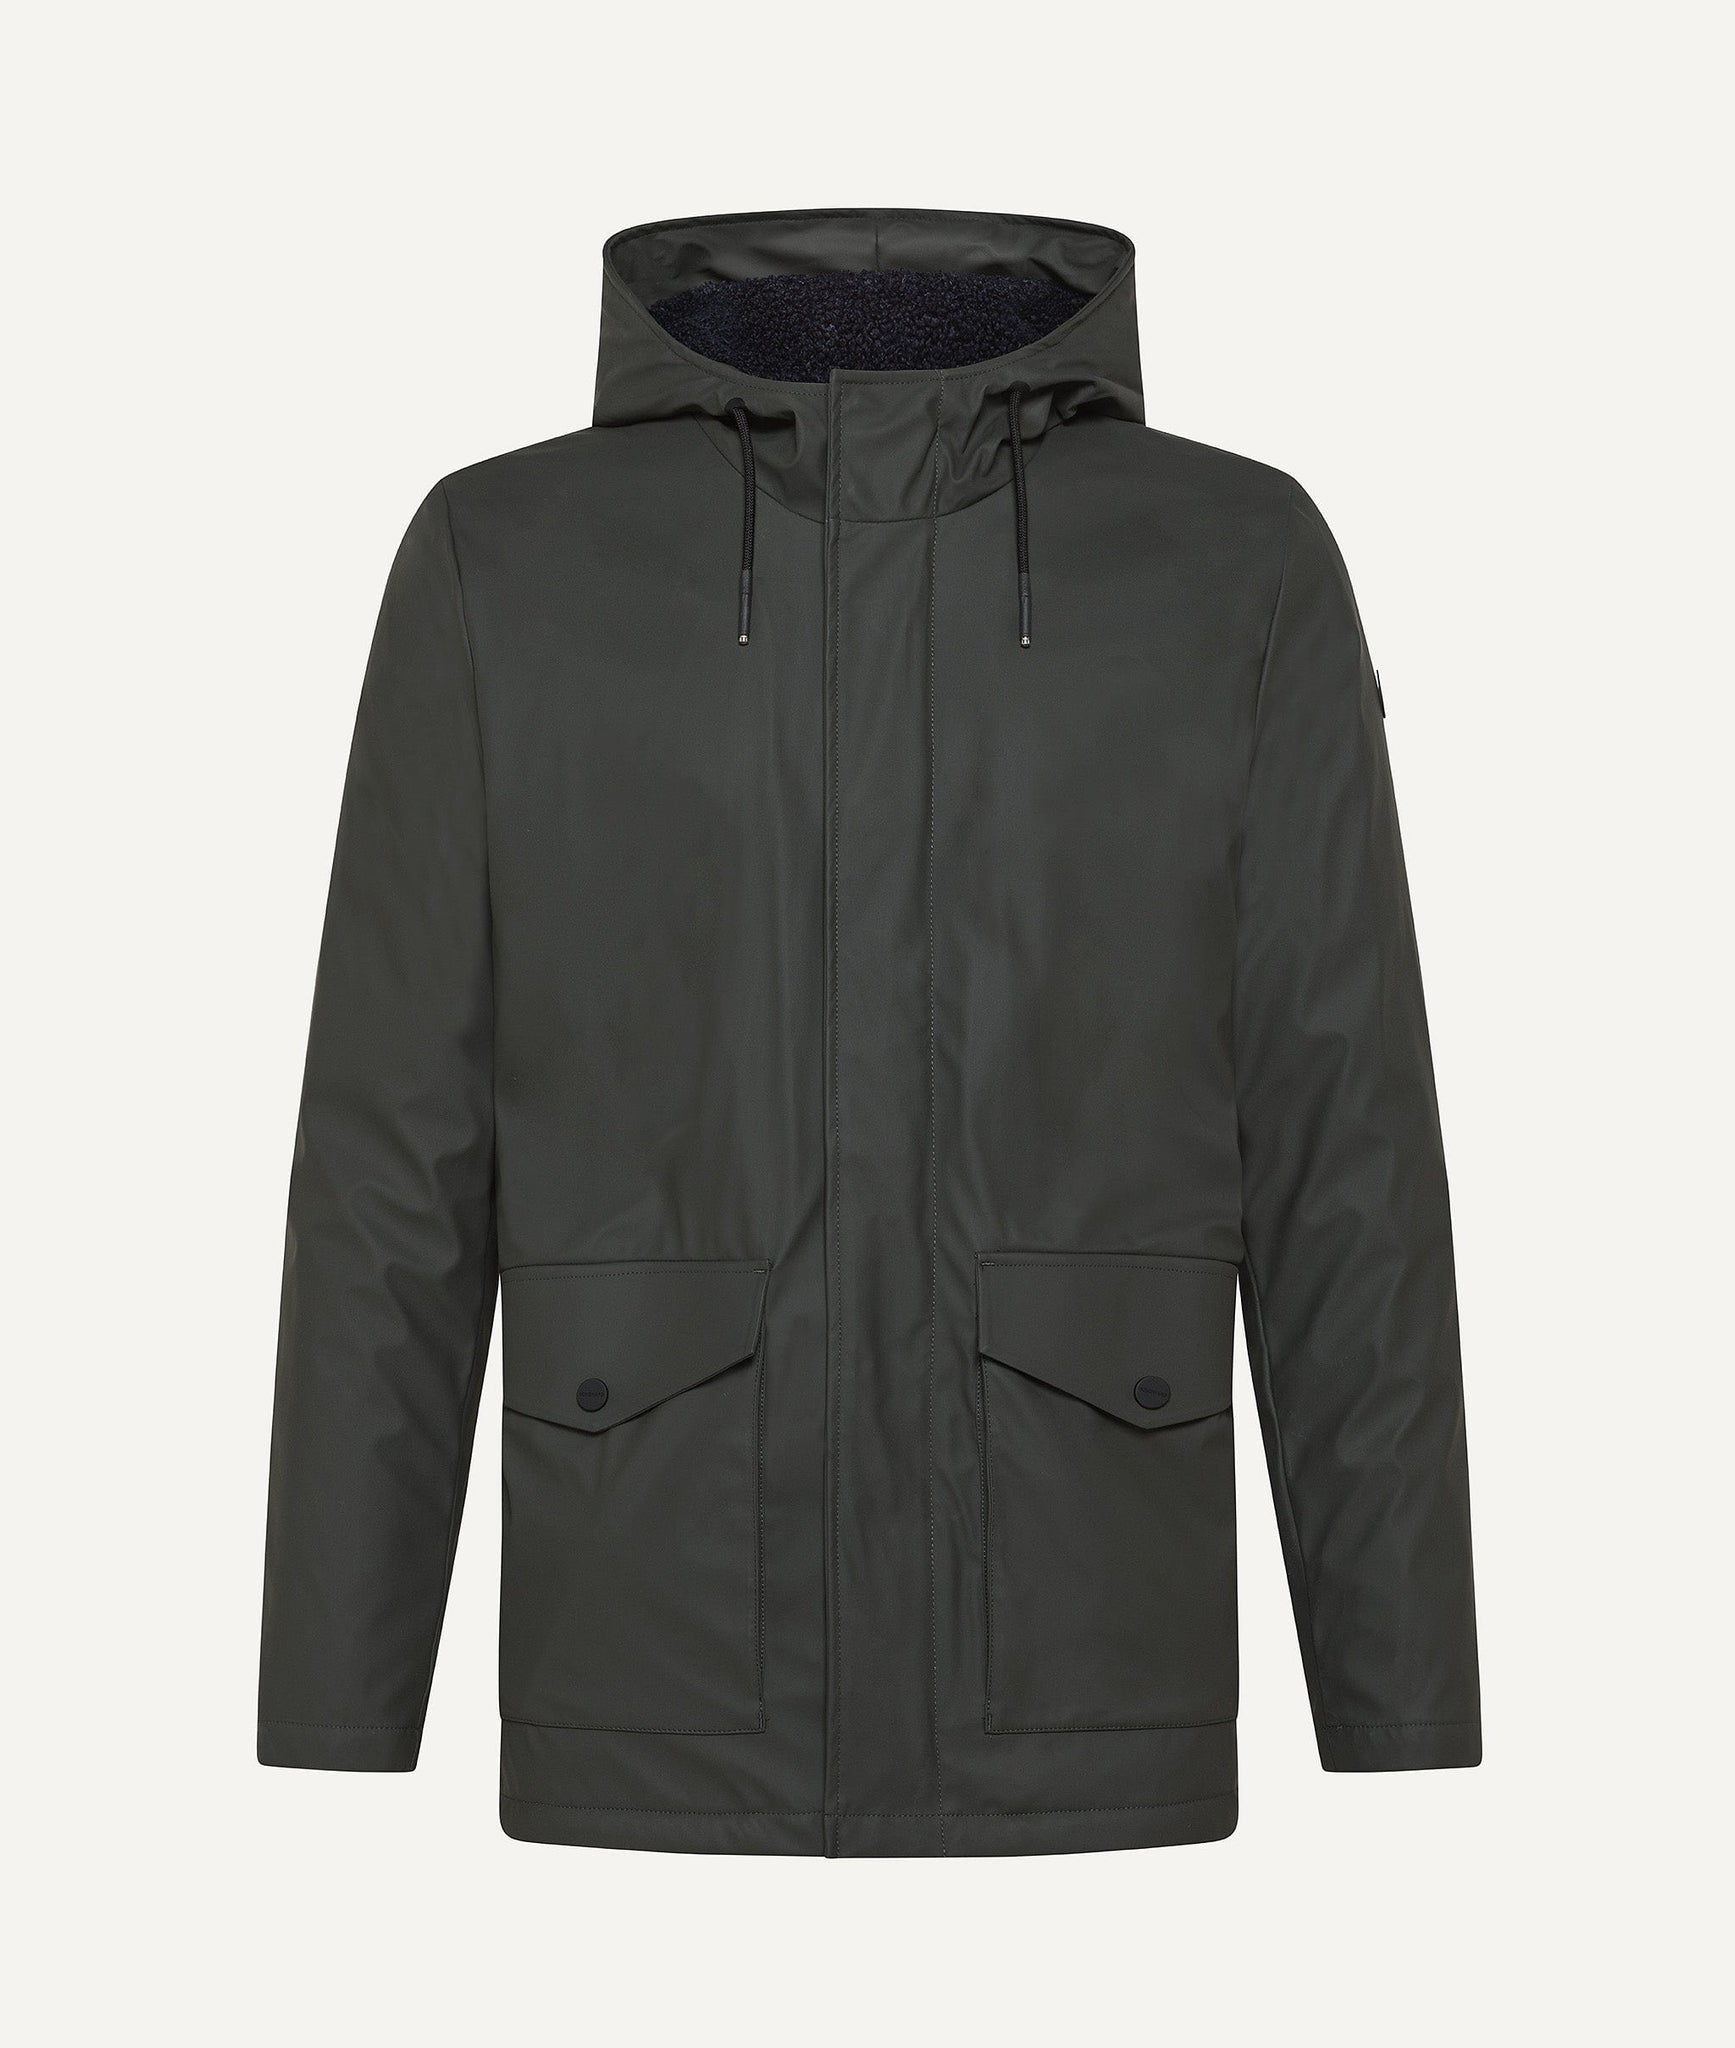 Homeward - Rain Jacket with Shearling in Polyester and Plyurethane